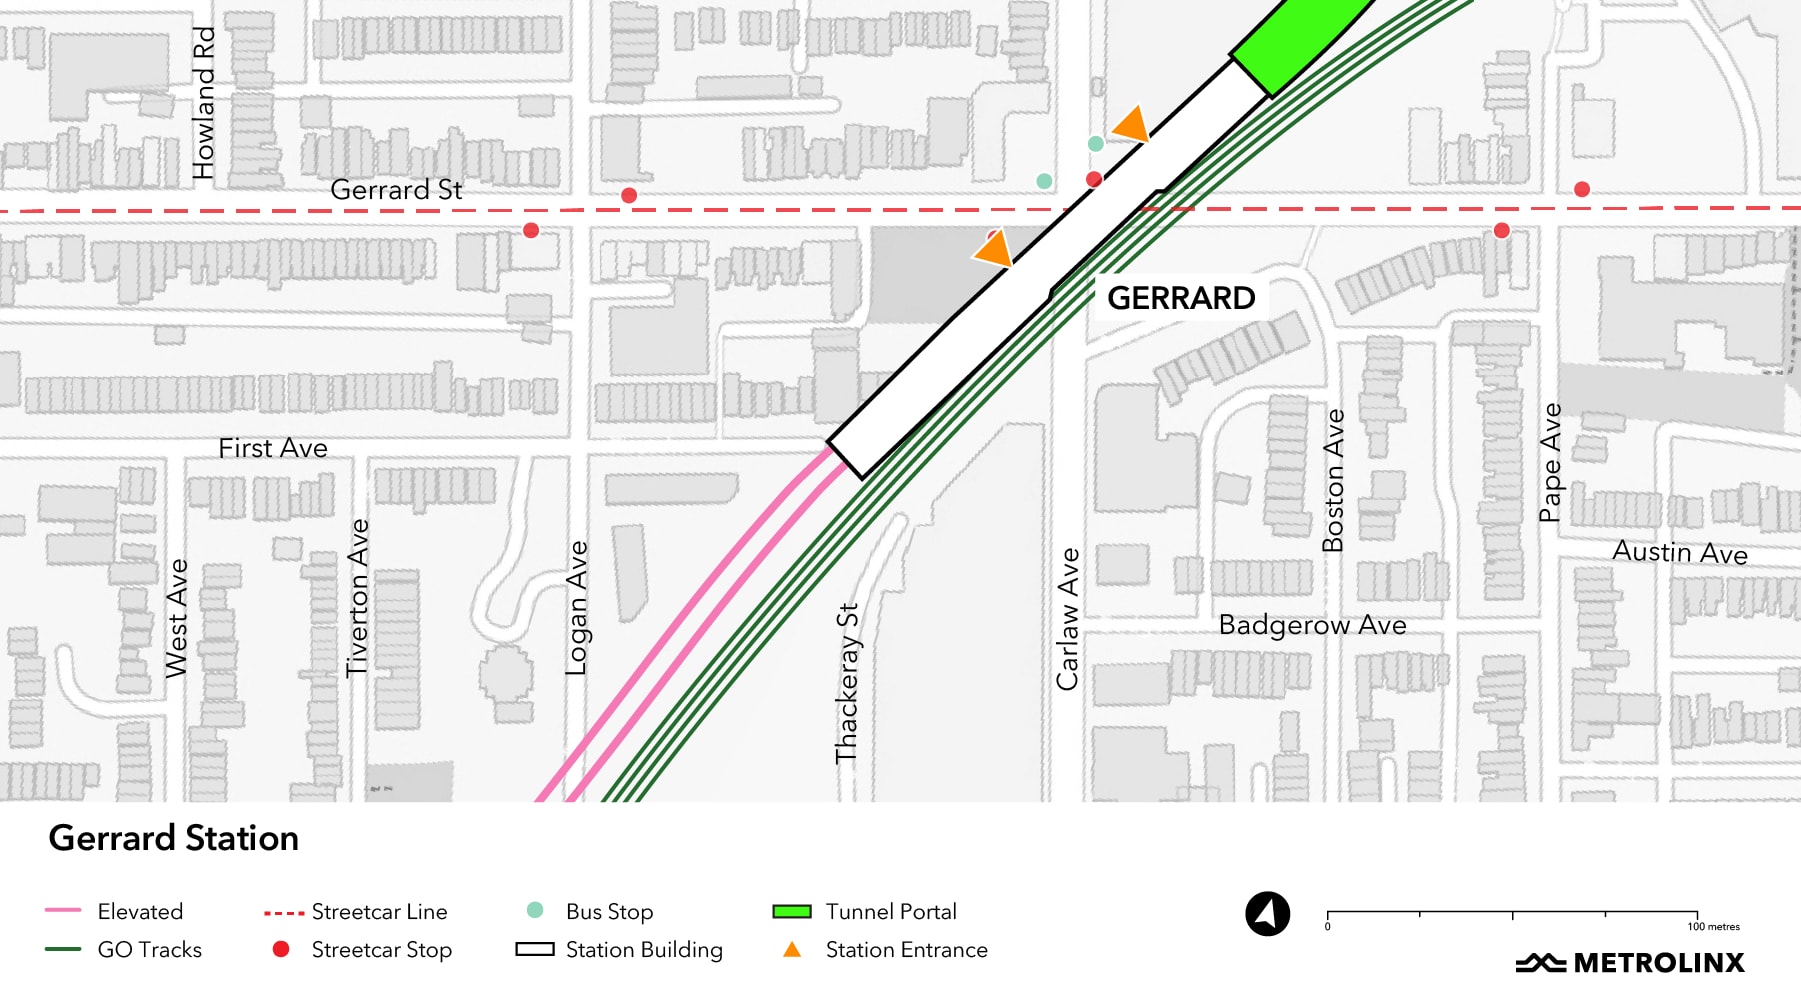 Map of the line segment containing Gerrard station